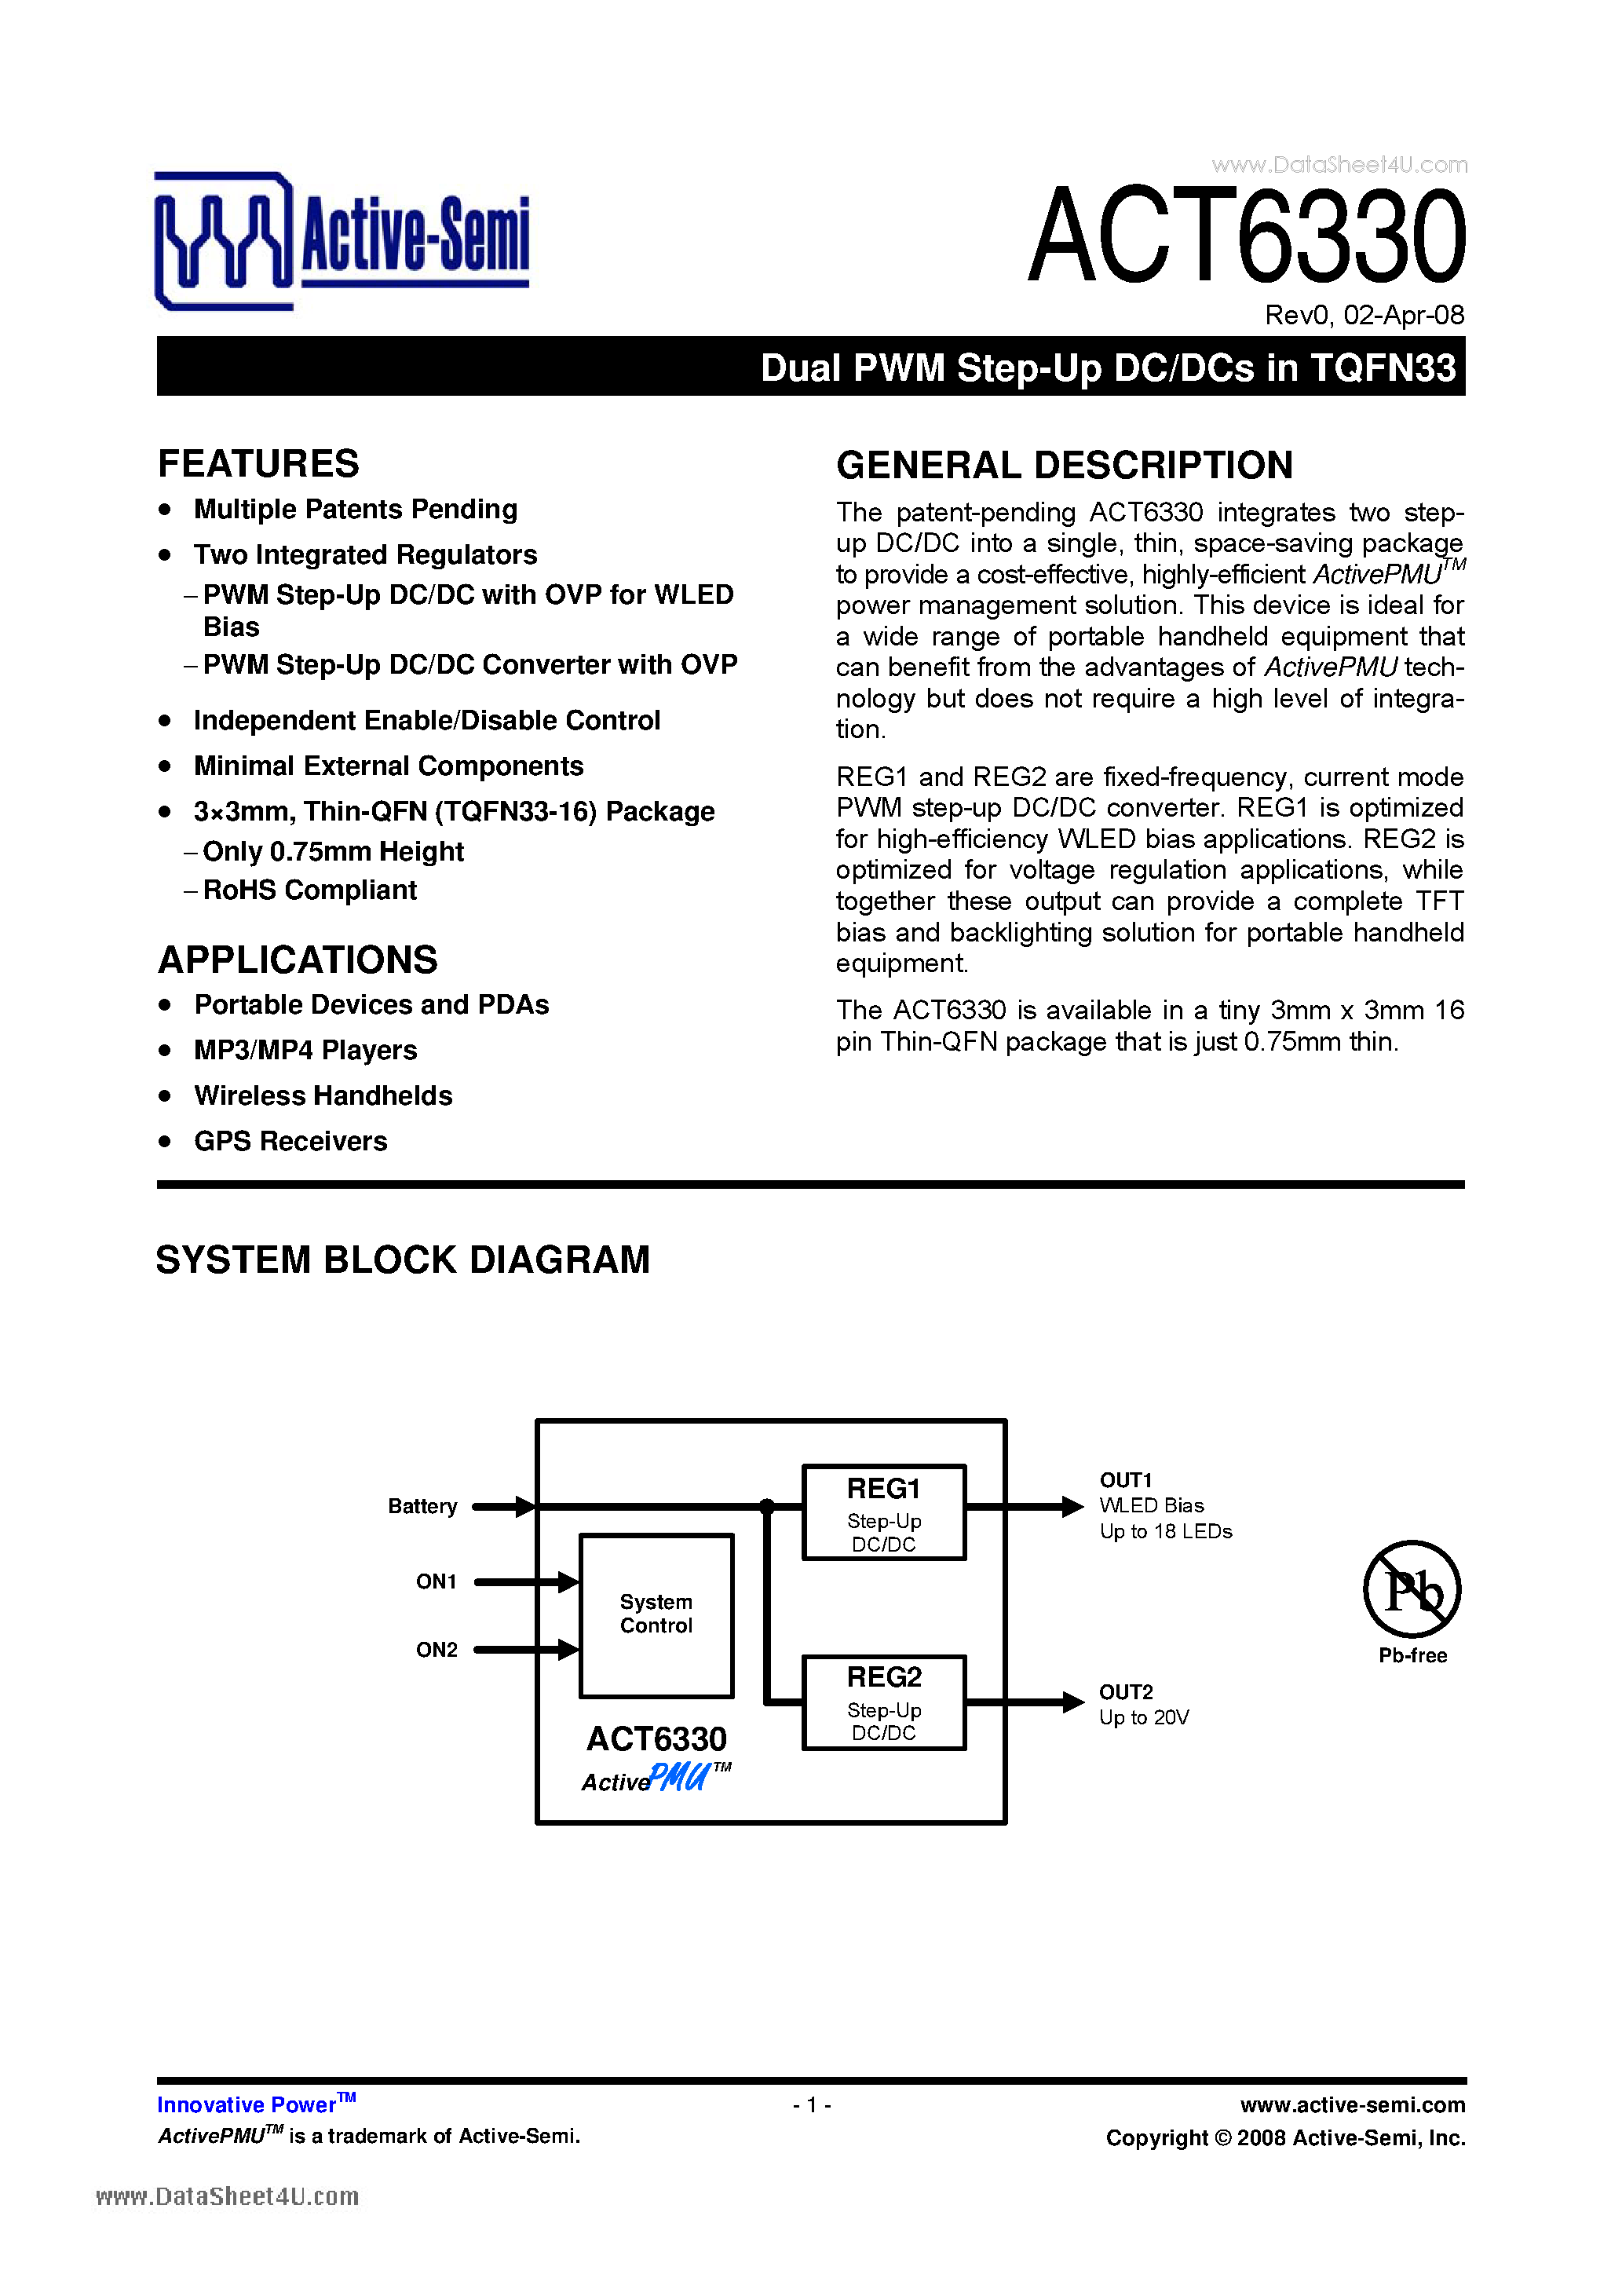 Datasheet ACT6330 - Dual PWM Step-Up DC/DCs page 1